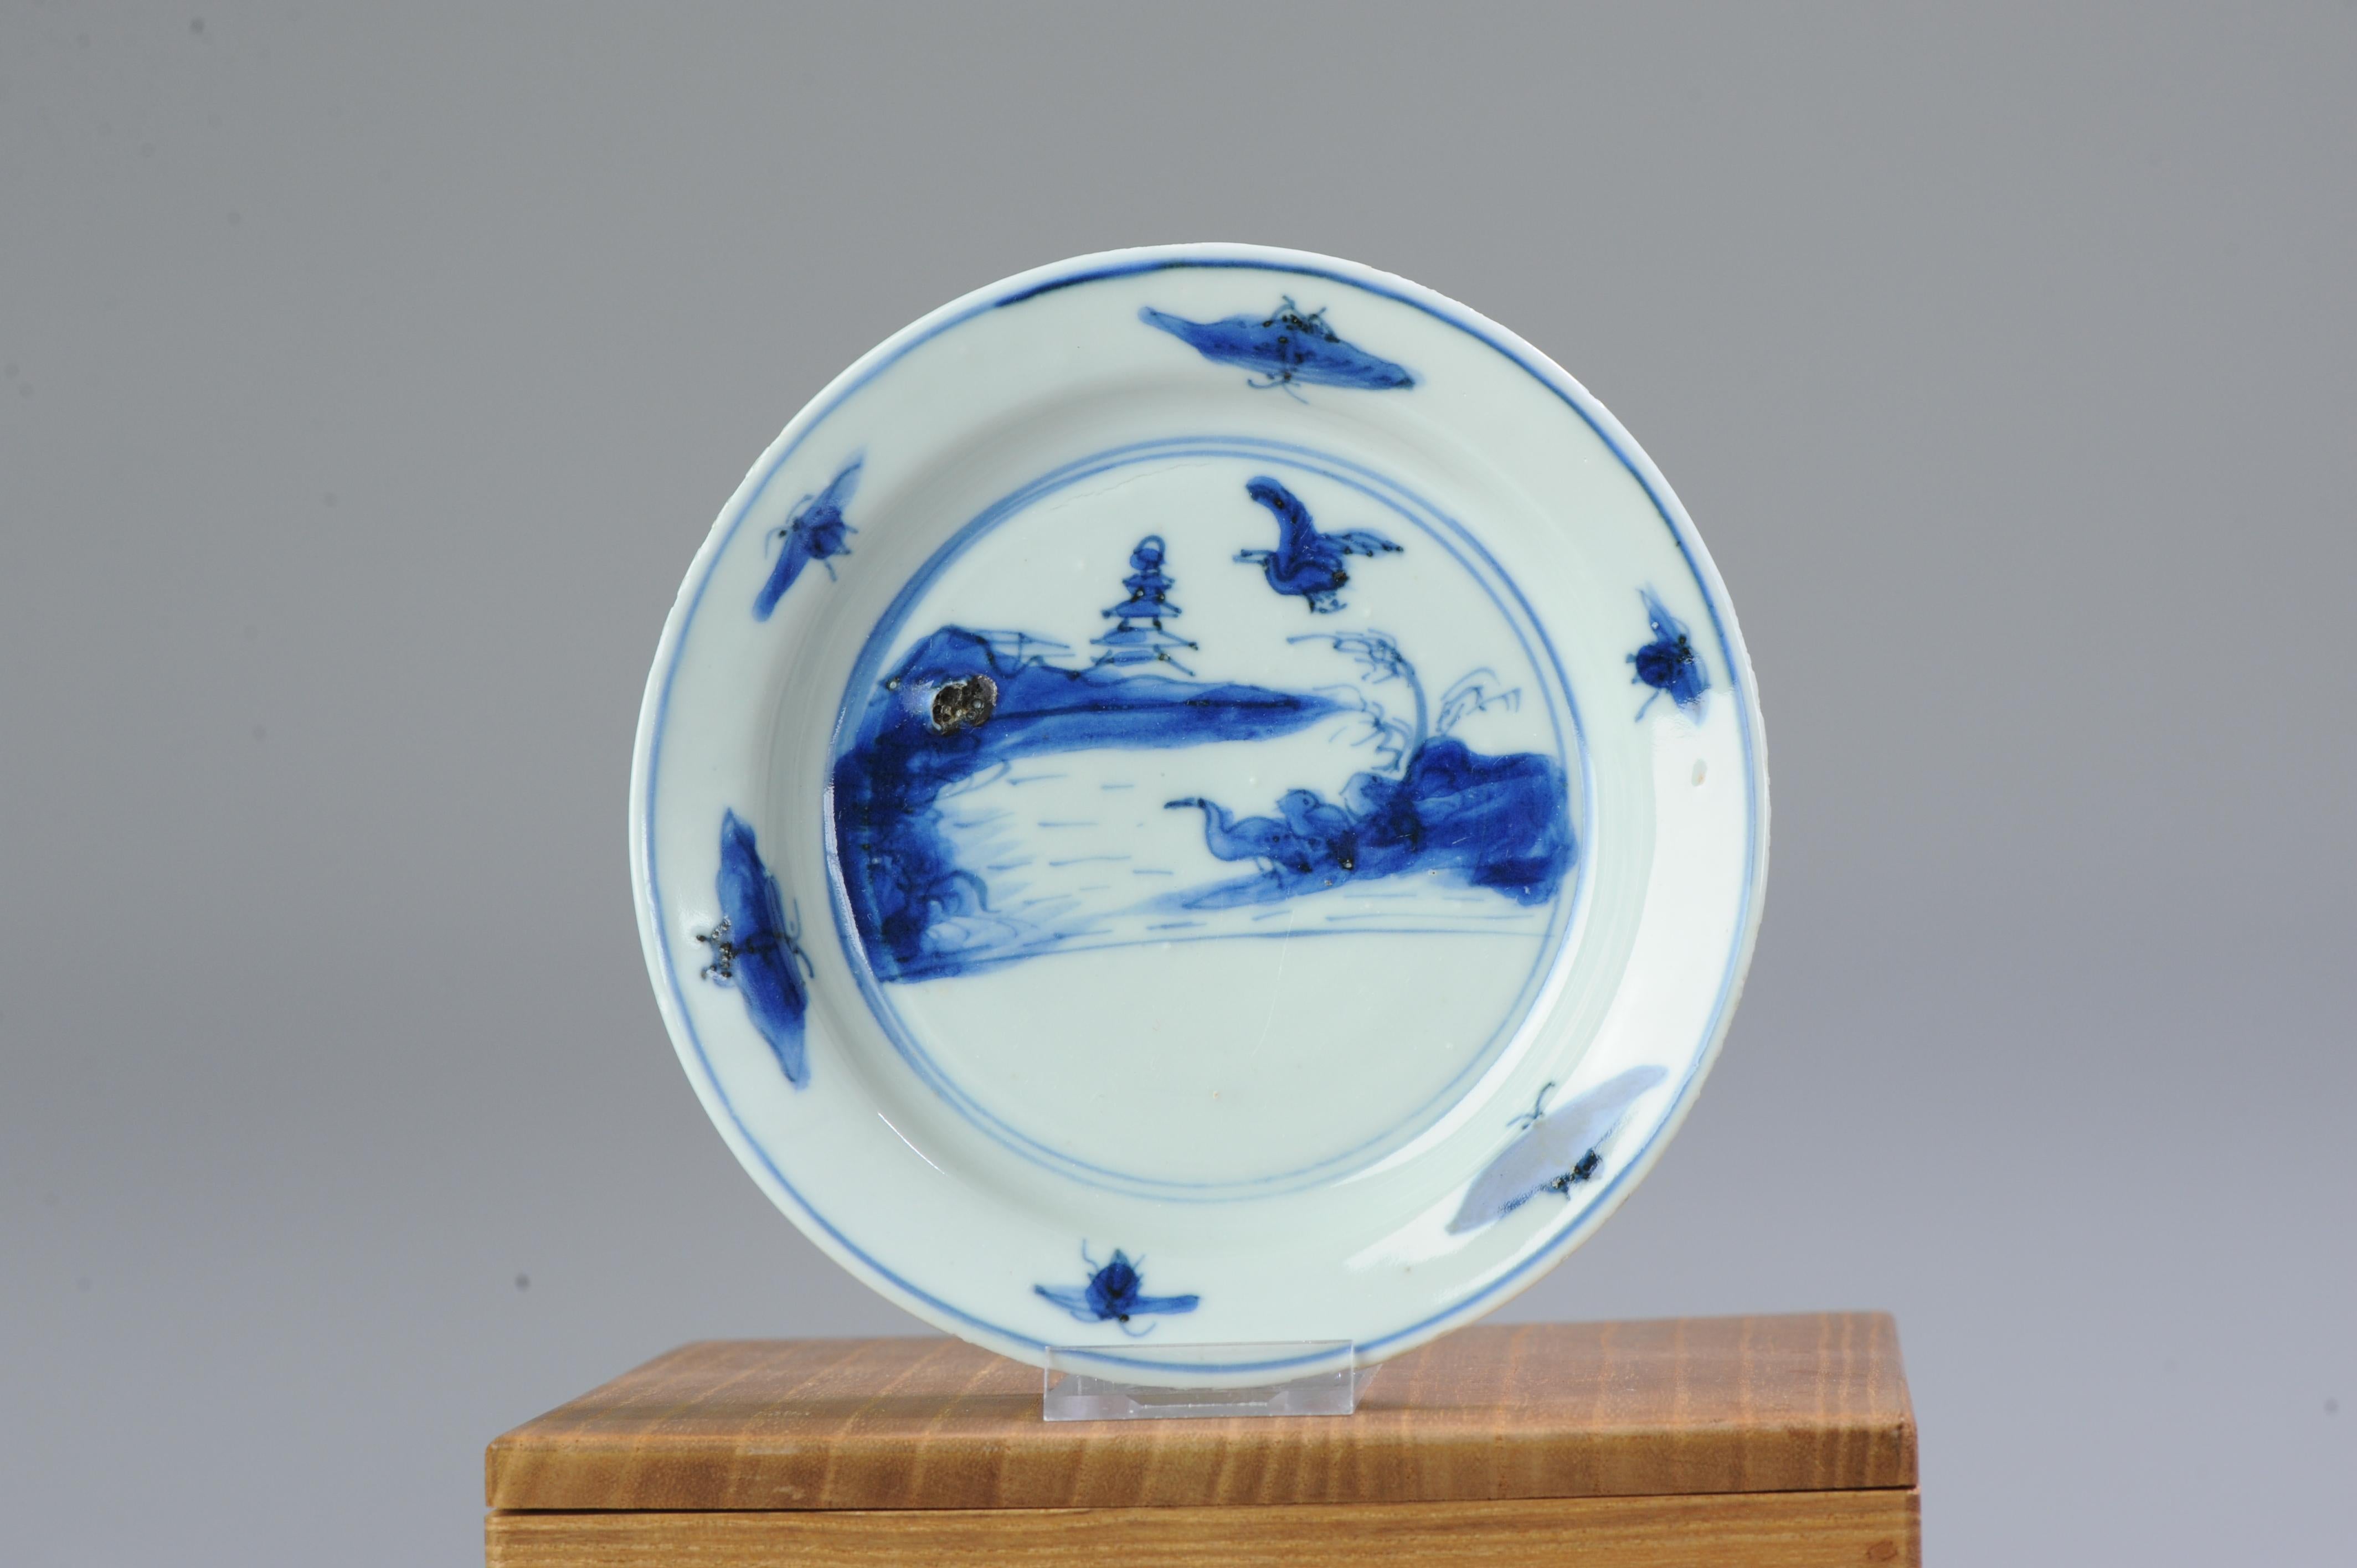 Description

A very nicely decorated Late Ming Blue and White Porcelain Dish with a landscape scene situated in two concentric circles with Ducks/Geese under a pine tree in a mountainious landscape with a pagode in the background. The moon at te